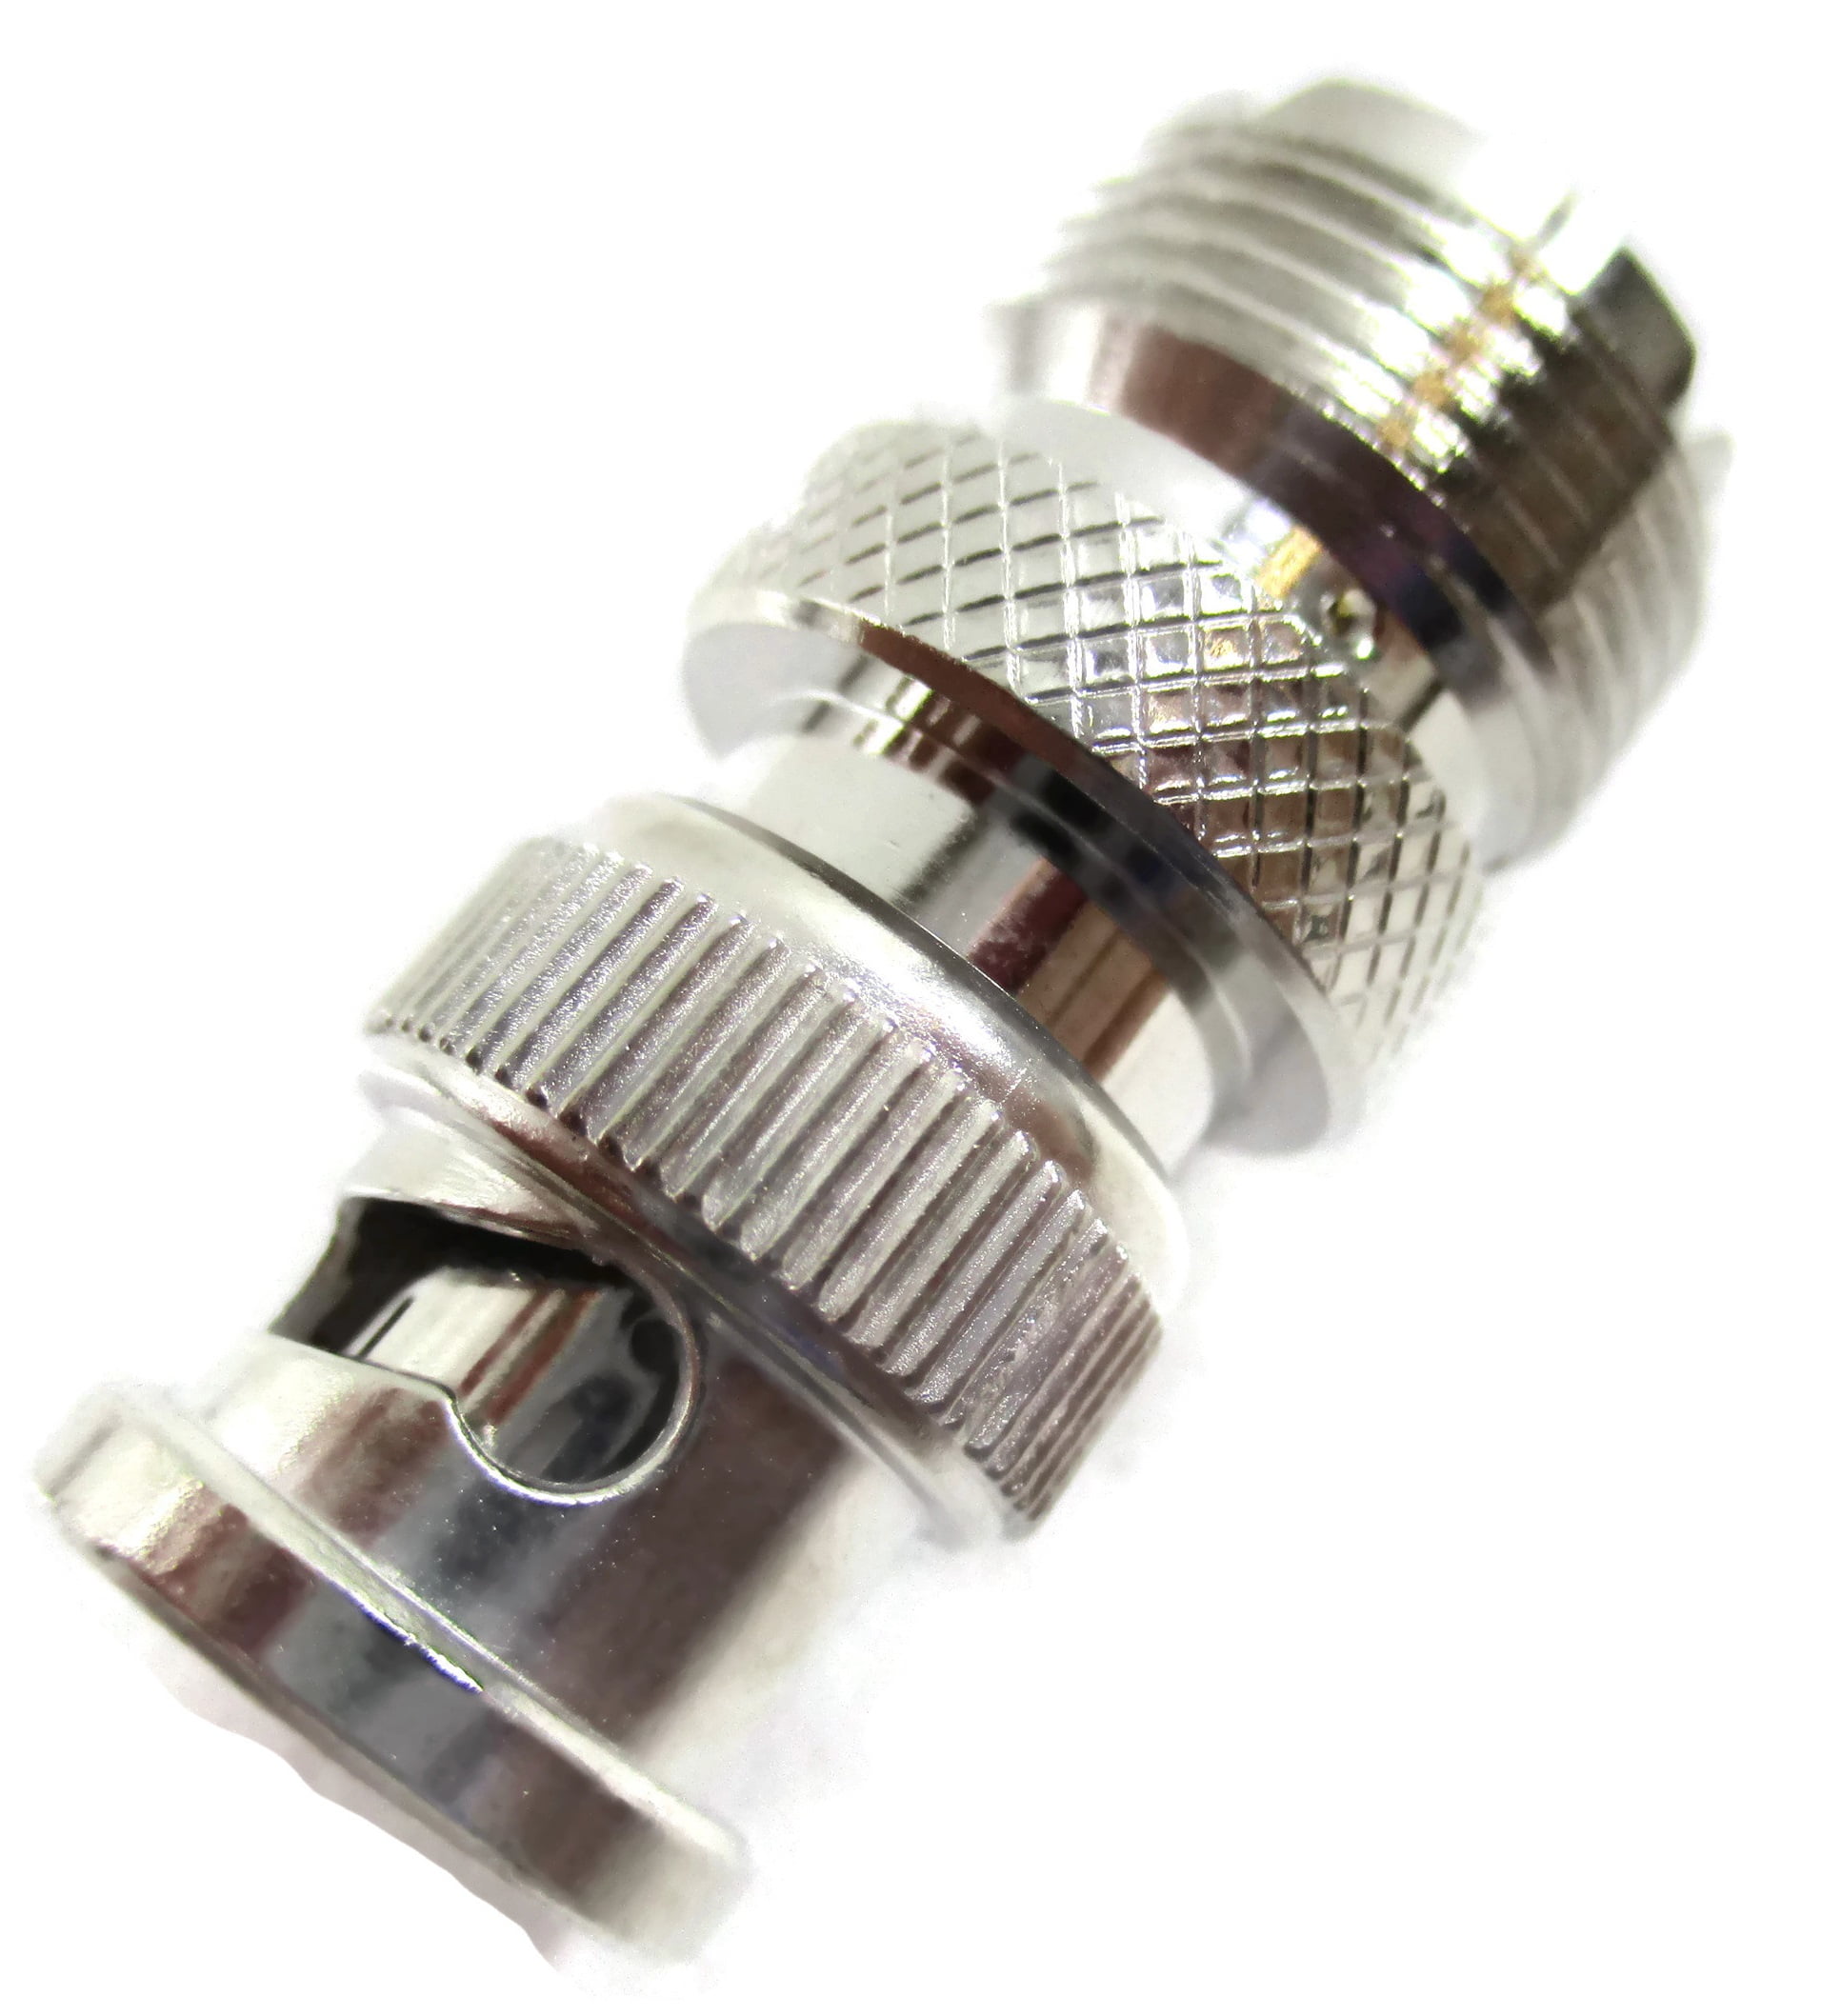 Jack RF Coaxial N Type Male Plug to BNC Female Adapter Connector  JB 